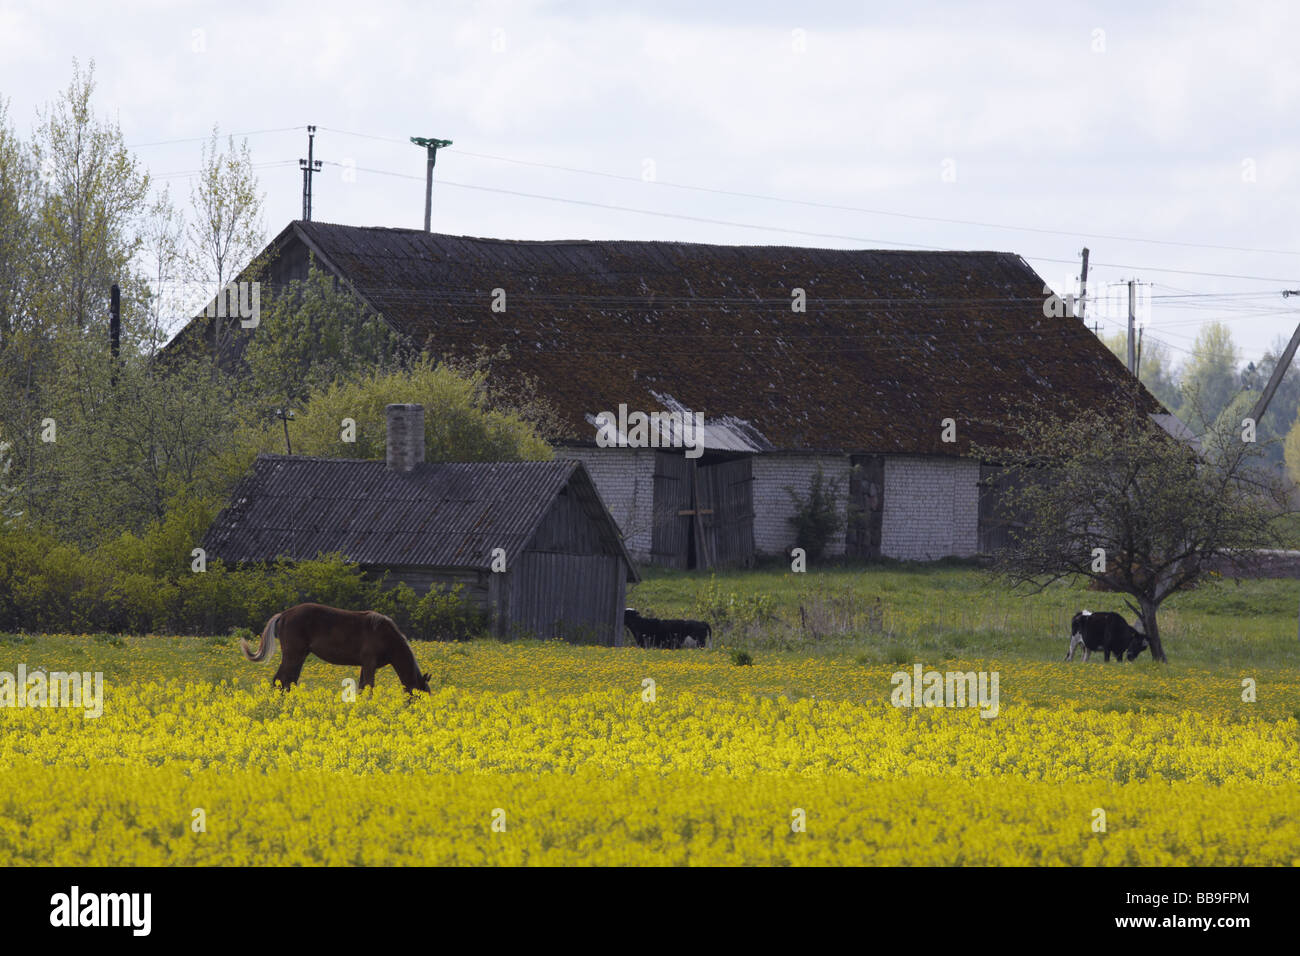 Canola field with horse, cattle and farm building Stock Photo